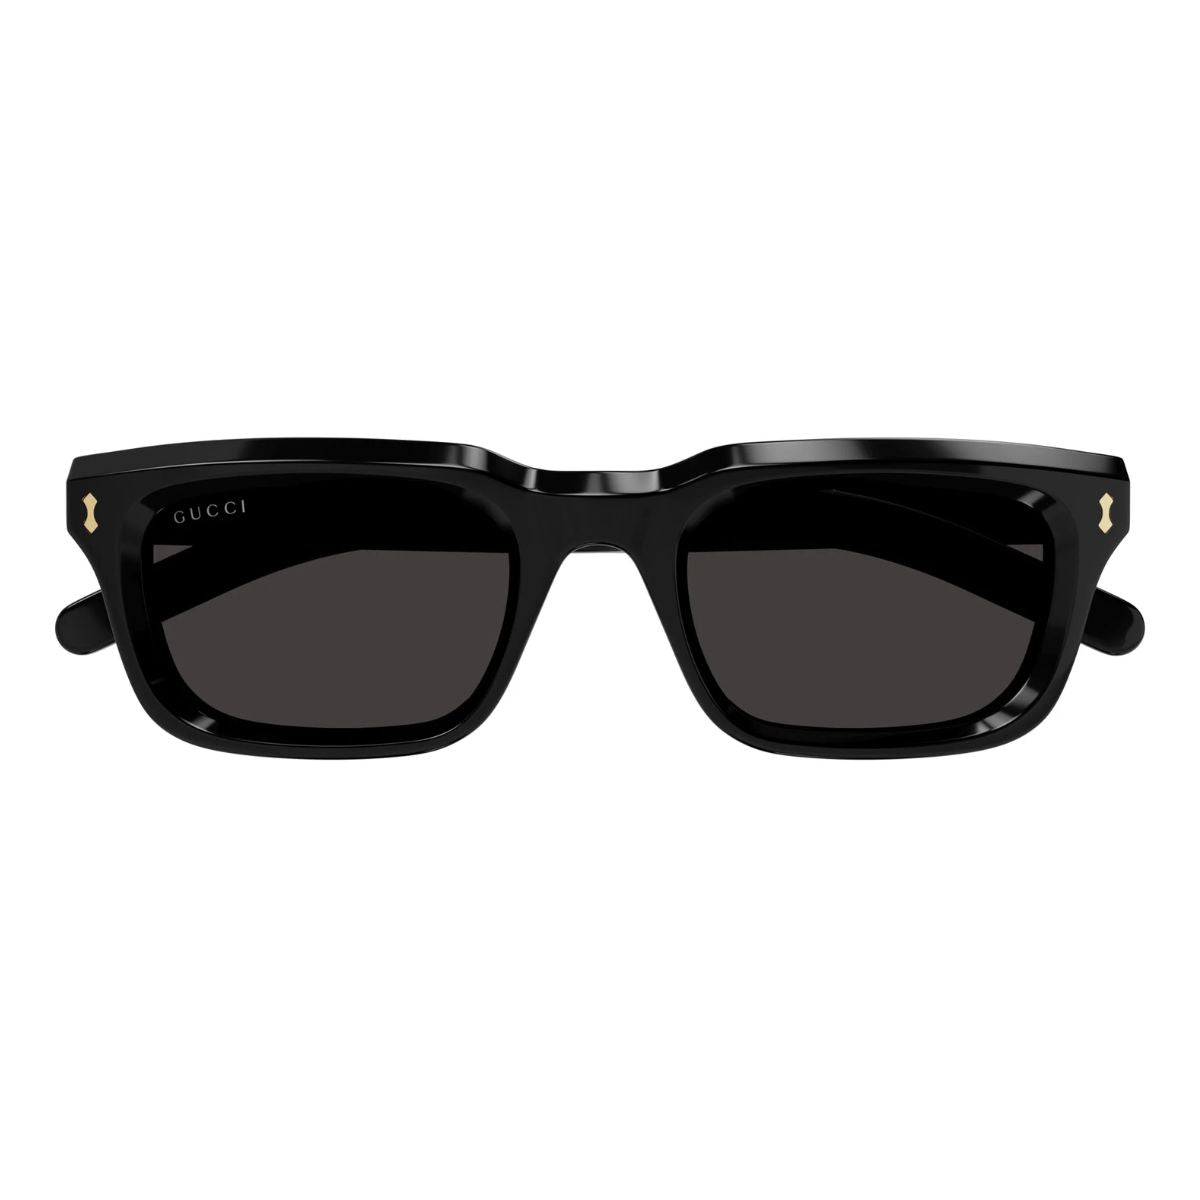  "Gucci 1524S 001 Sunglasses - Exquisite detailing and superior quality make these frames a standout choice."